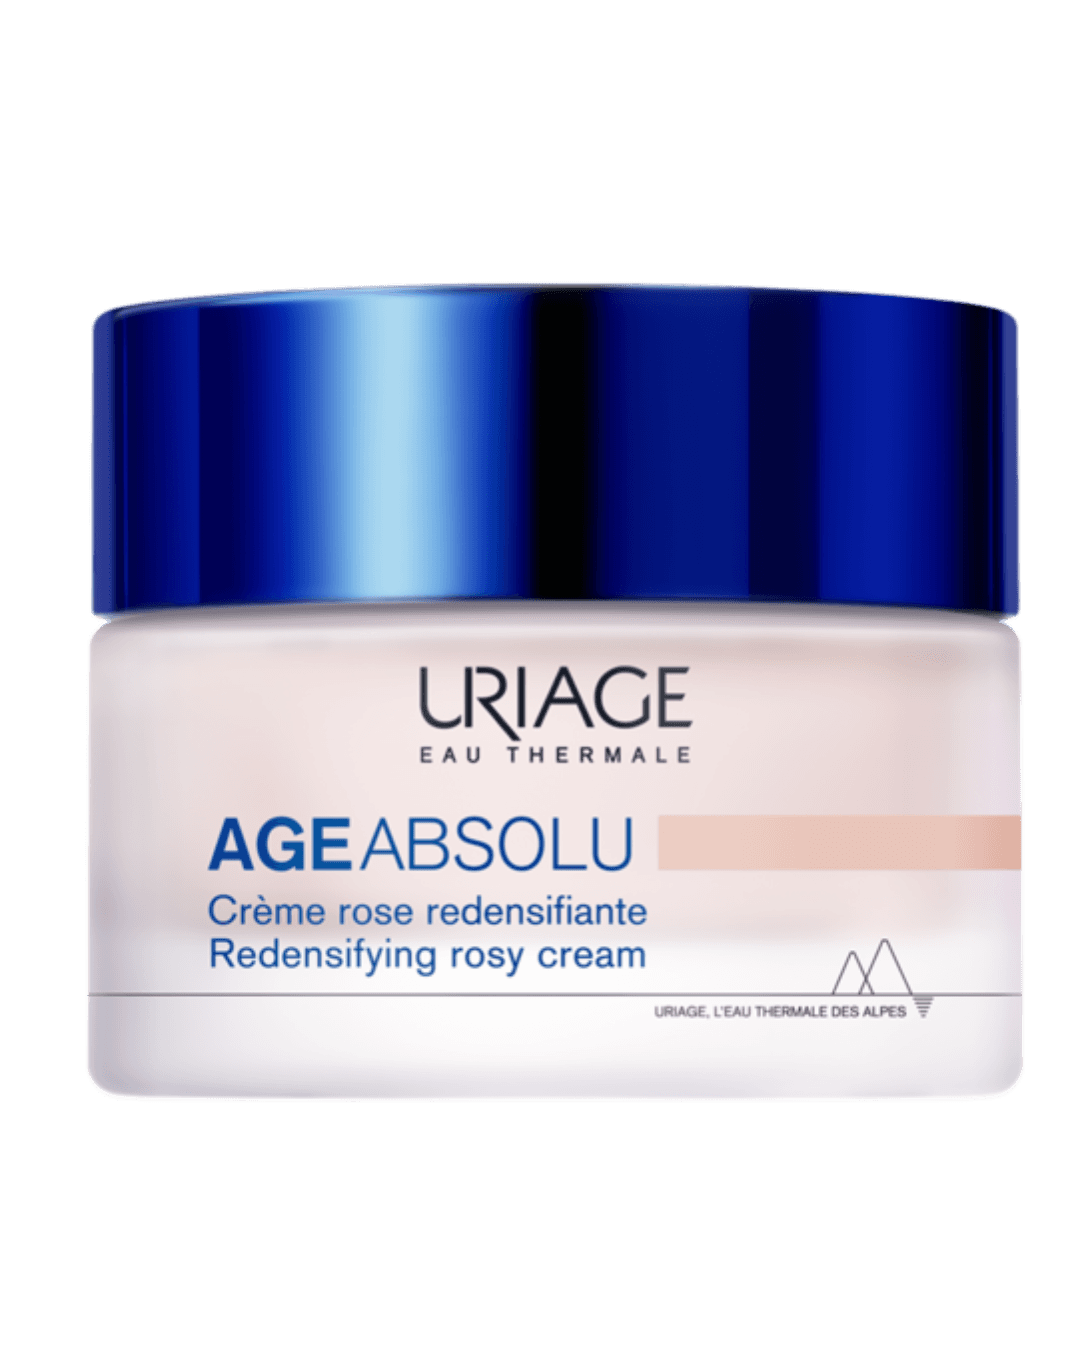 Uriage Age Absolu Redensifying Rosy Cream